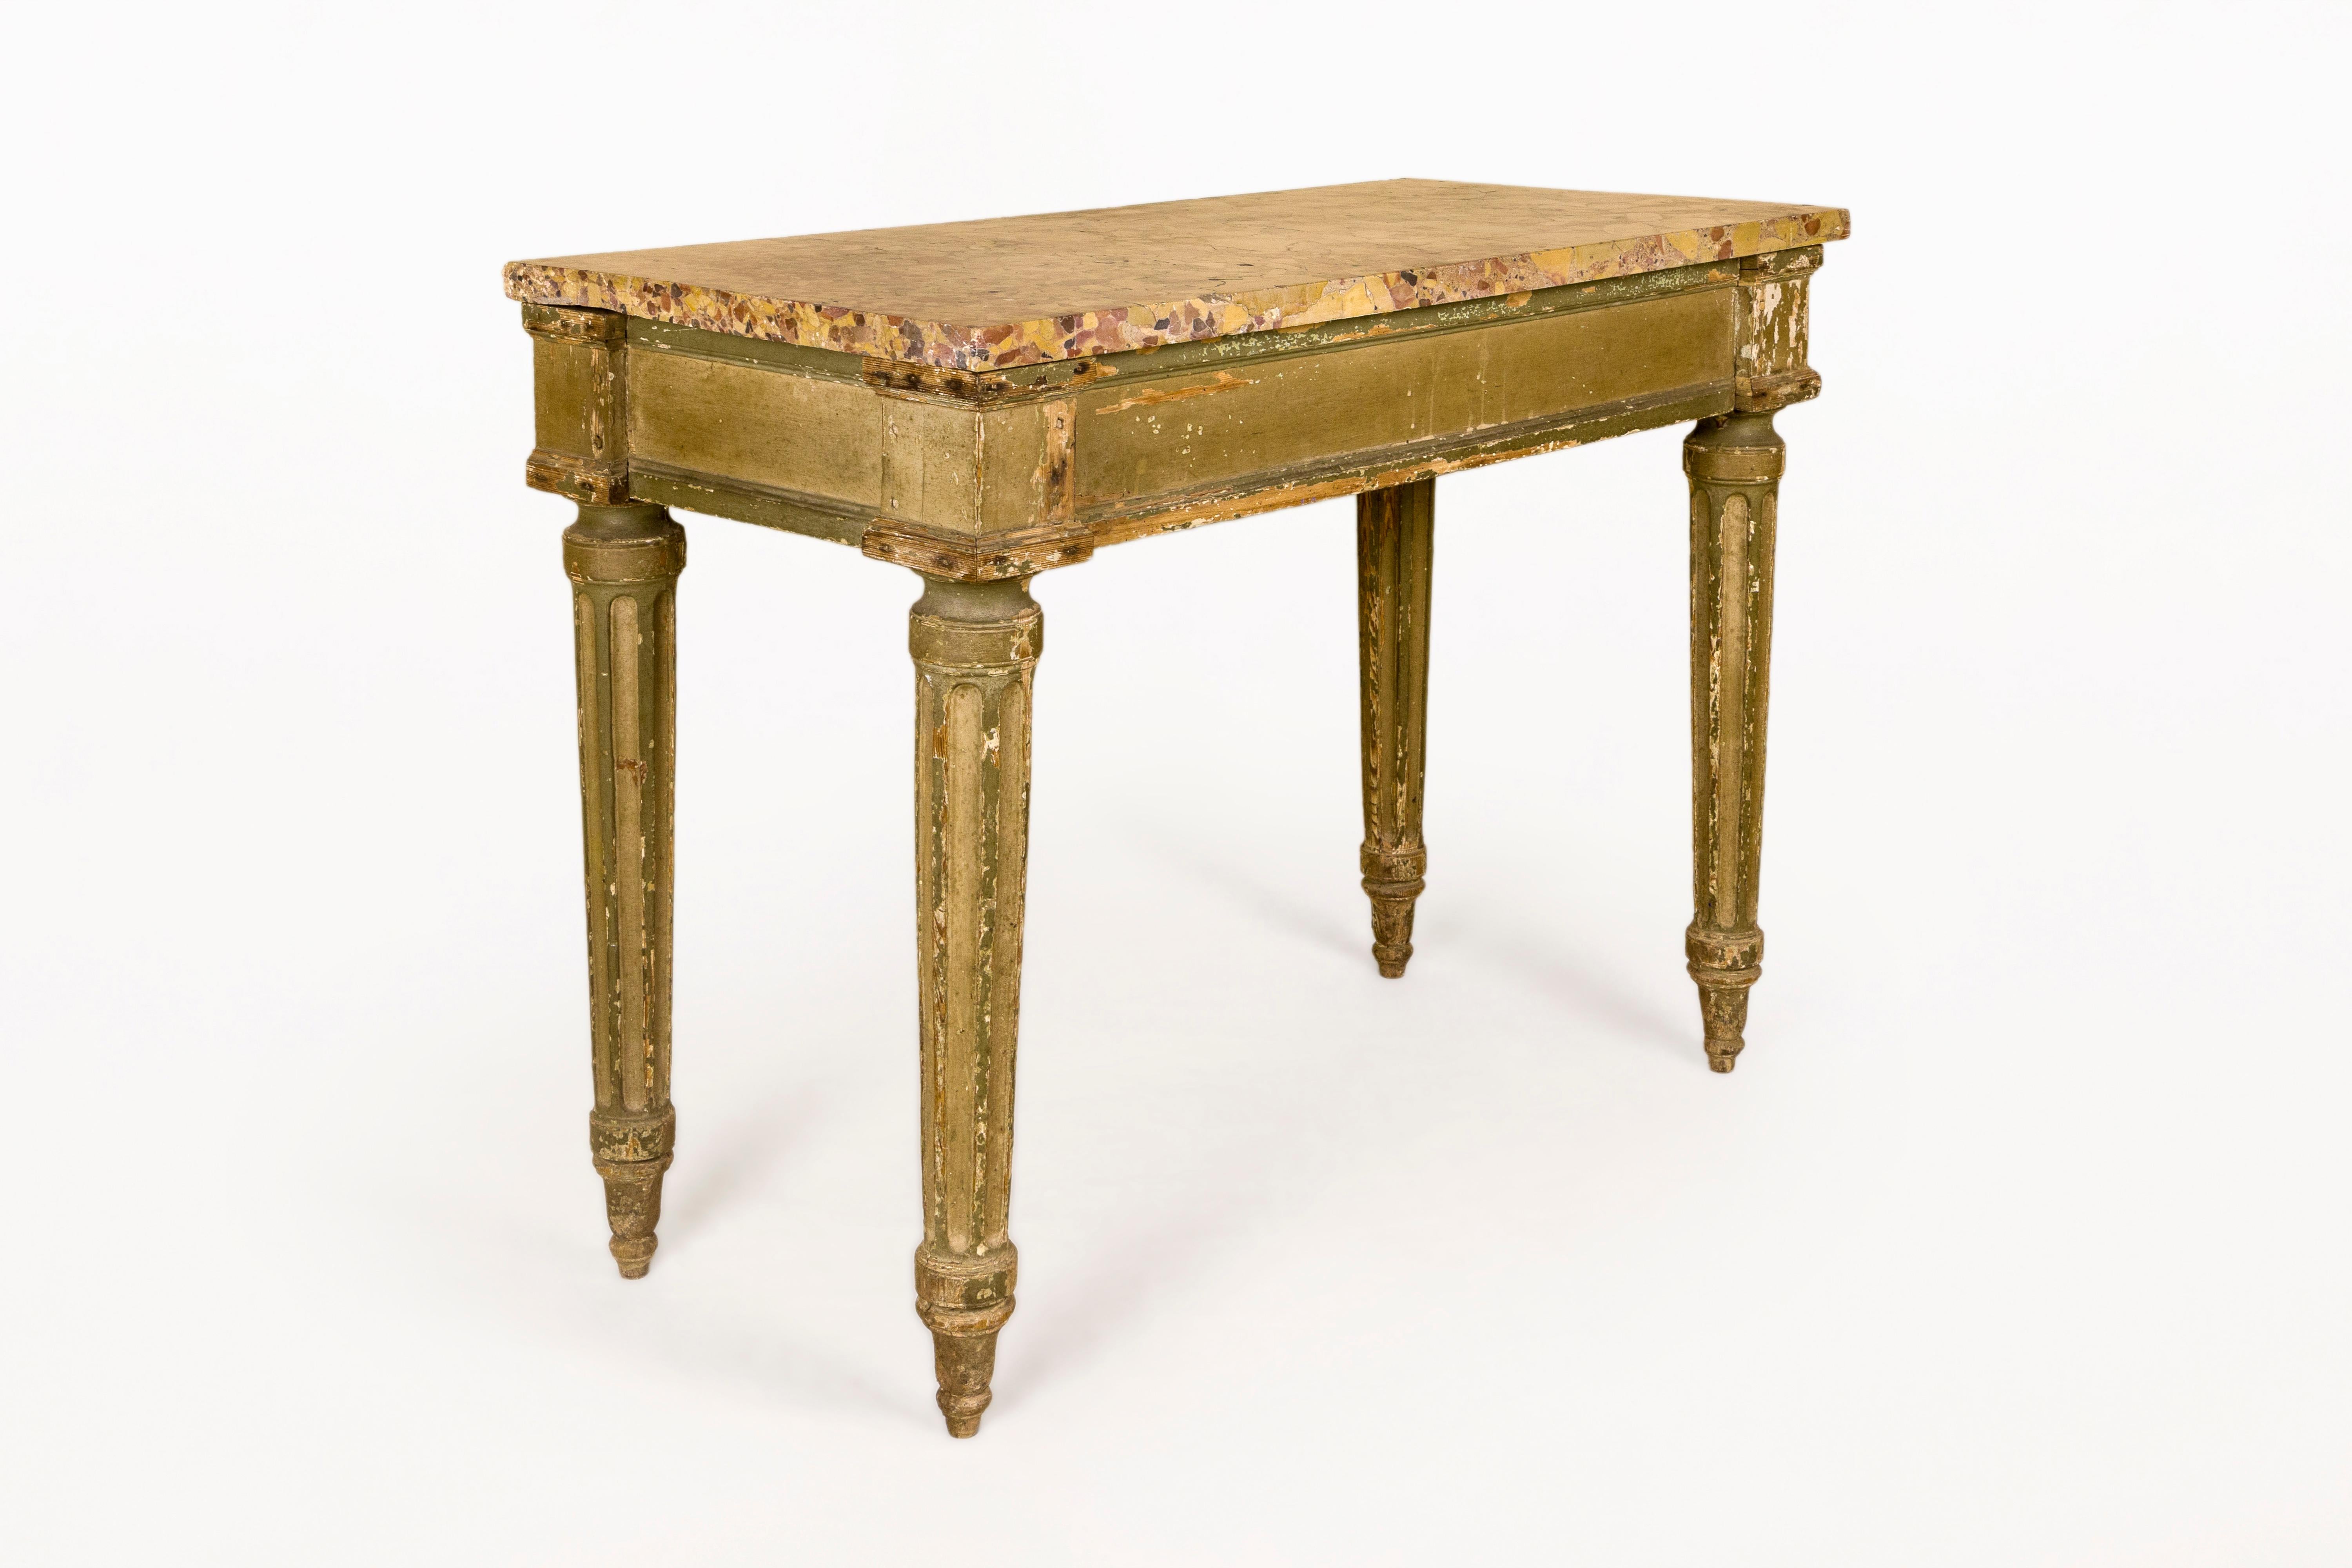 Console table.
Original paint.
Tholonet marble.
Provenance: Chateau in Provence, The South of France
18th Century, France.
Good vintage condition.
This Louis XVI Console Table is in its original, un-touched, nonrestored condition.
It is very